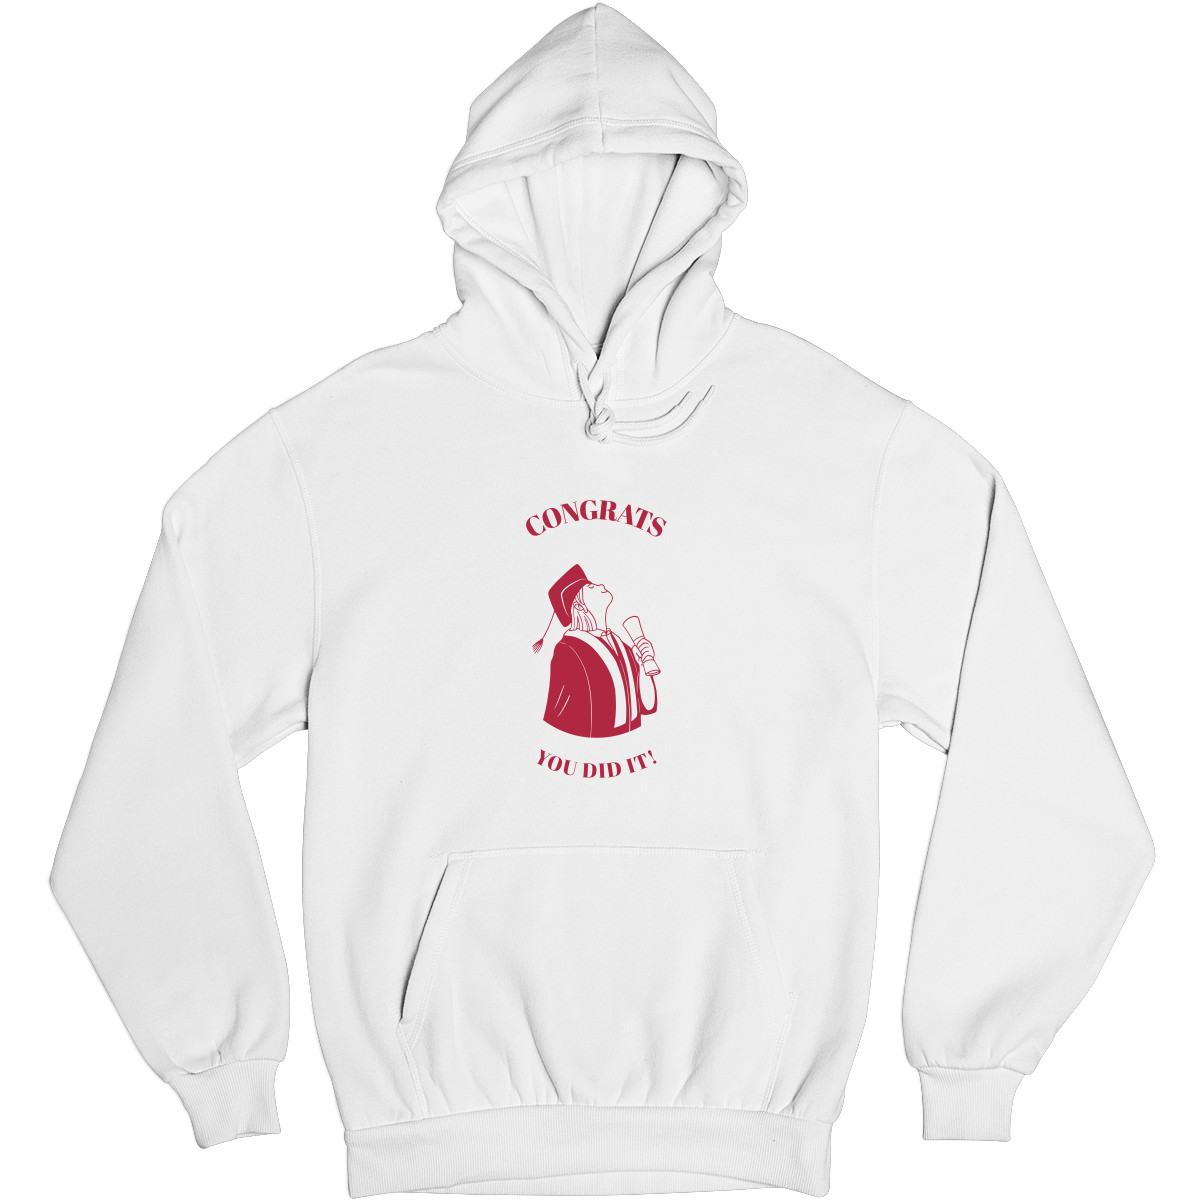 Congrats You Did It! Unisex Hoodie | White